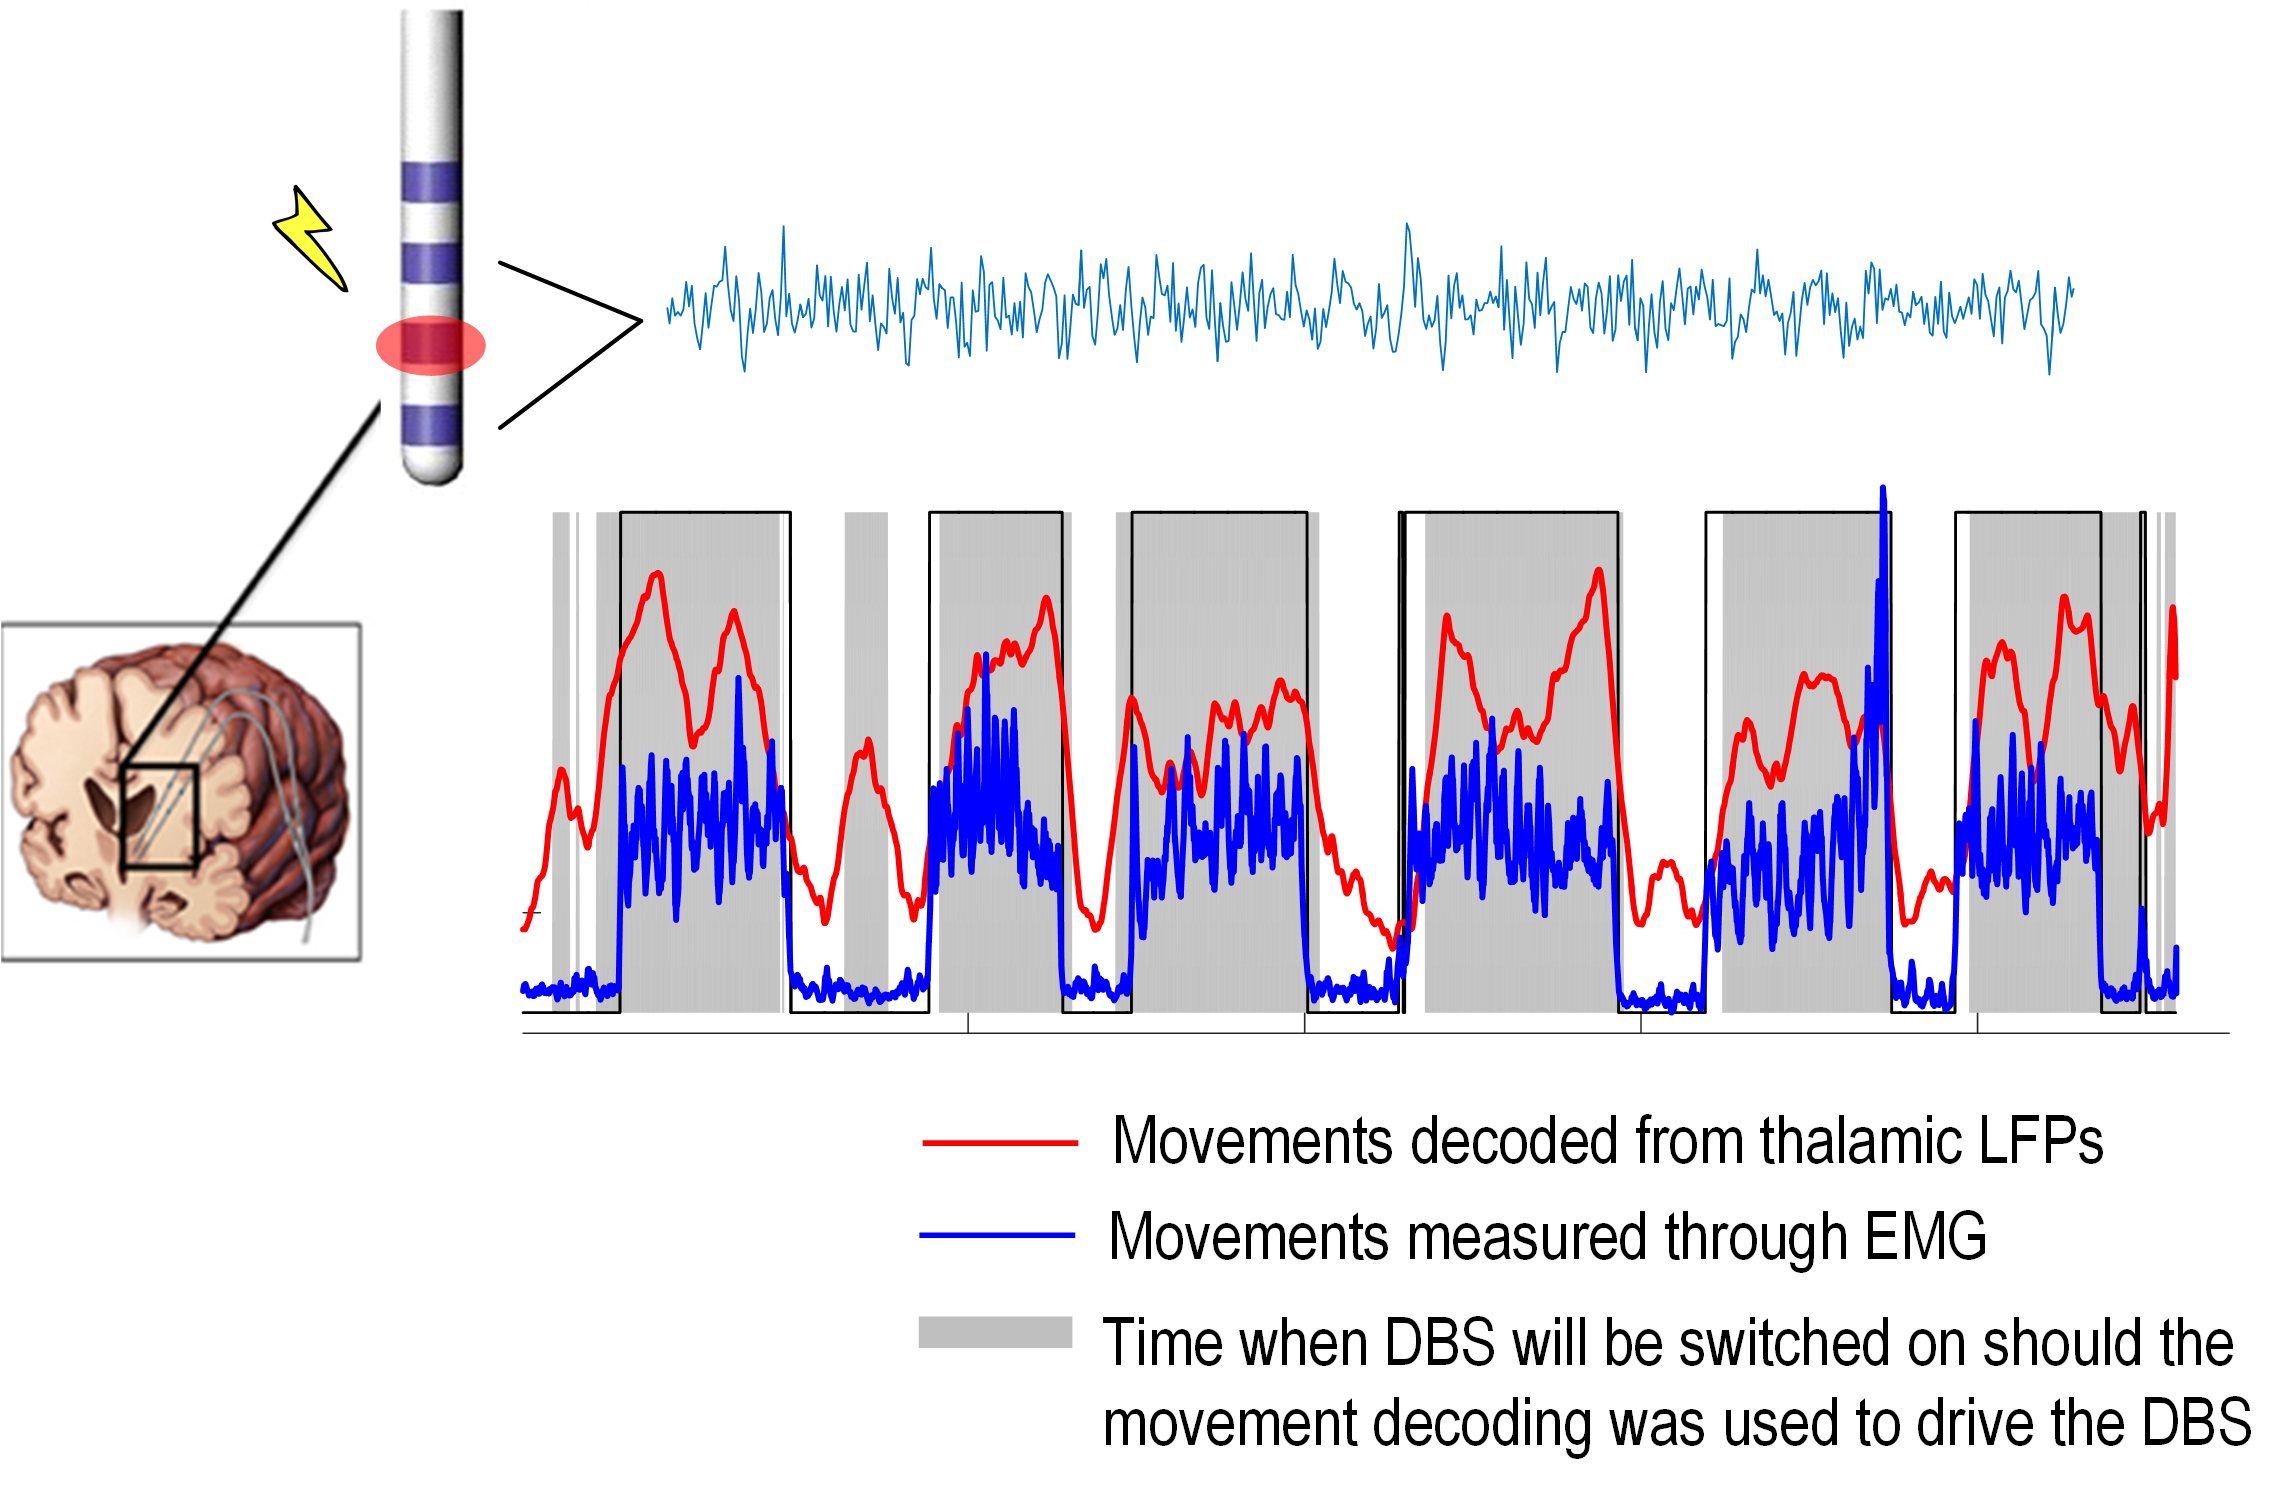 Local field potentials (LFPs) recorded from an electrode implanted in motor thalamus for therapeutic stimulation was used to identify whether the patient is making a voluntary movement or not. This matches very well the movements measured through muscle activities